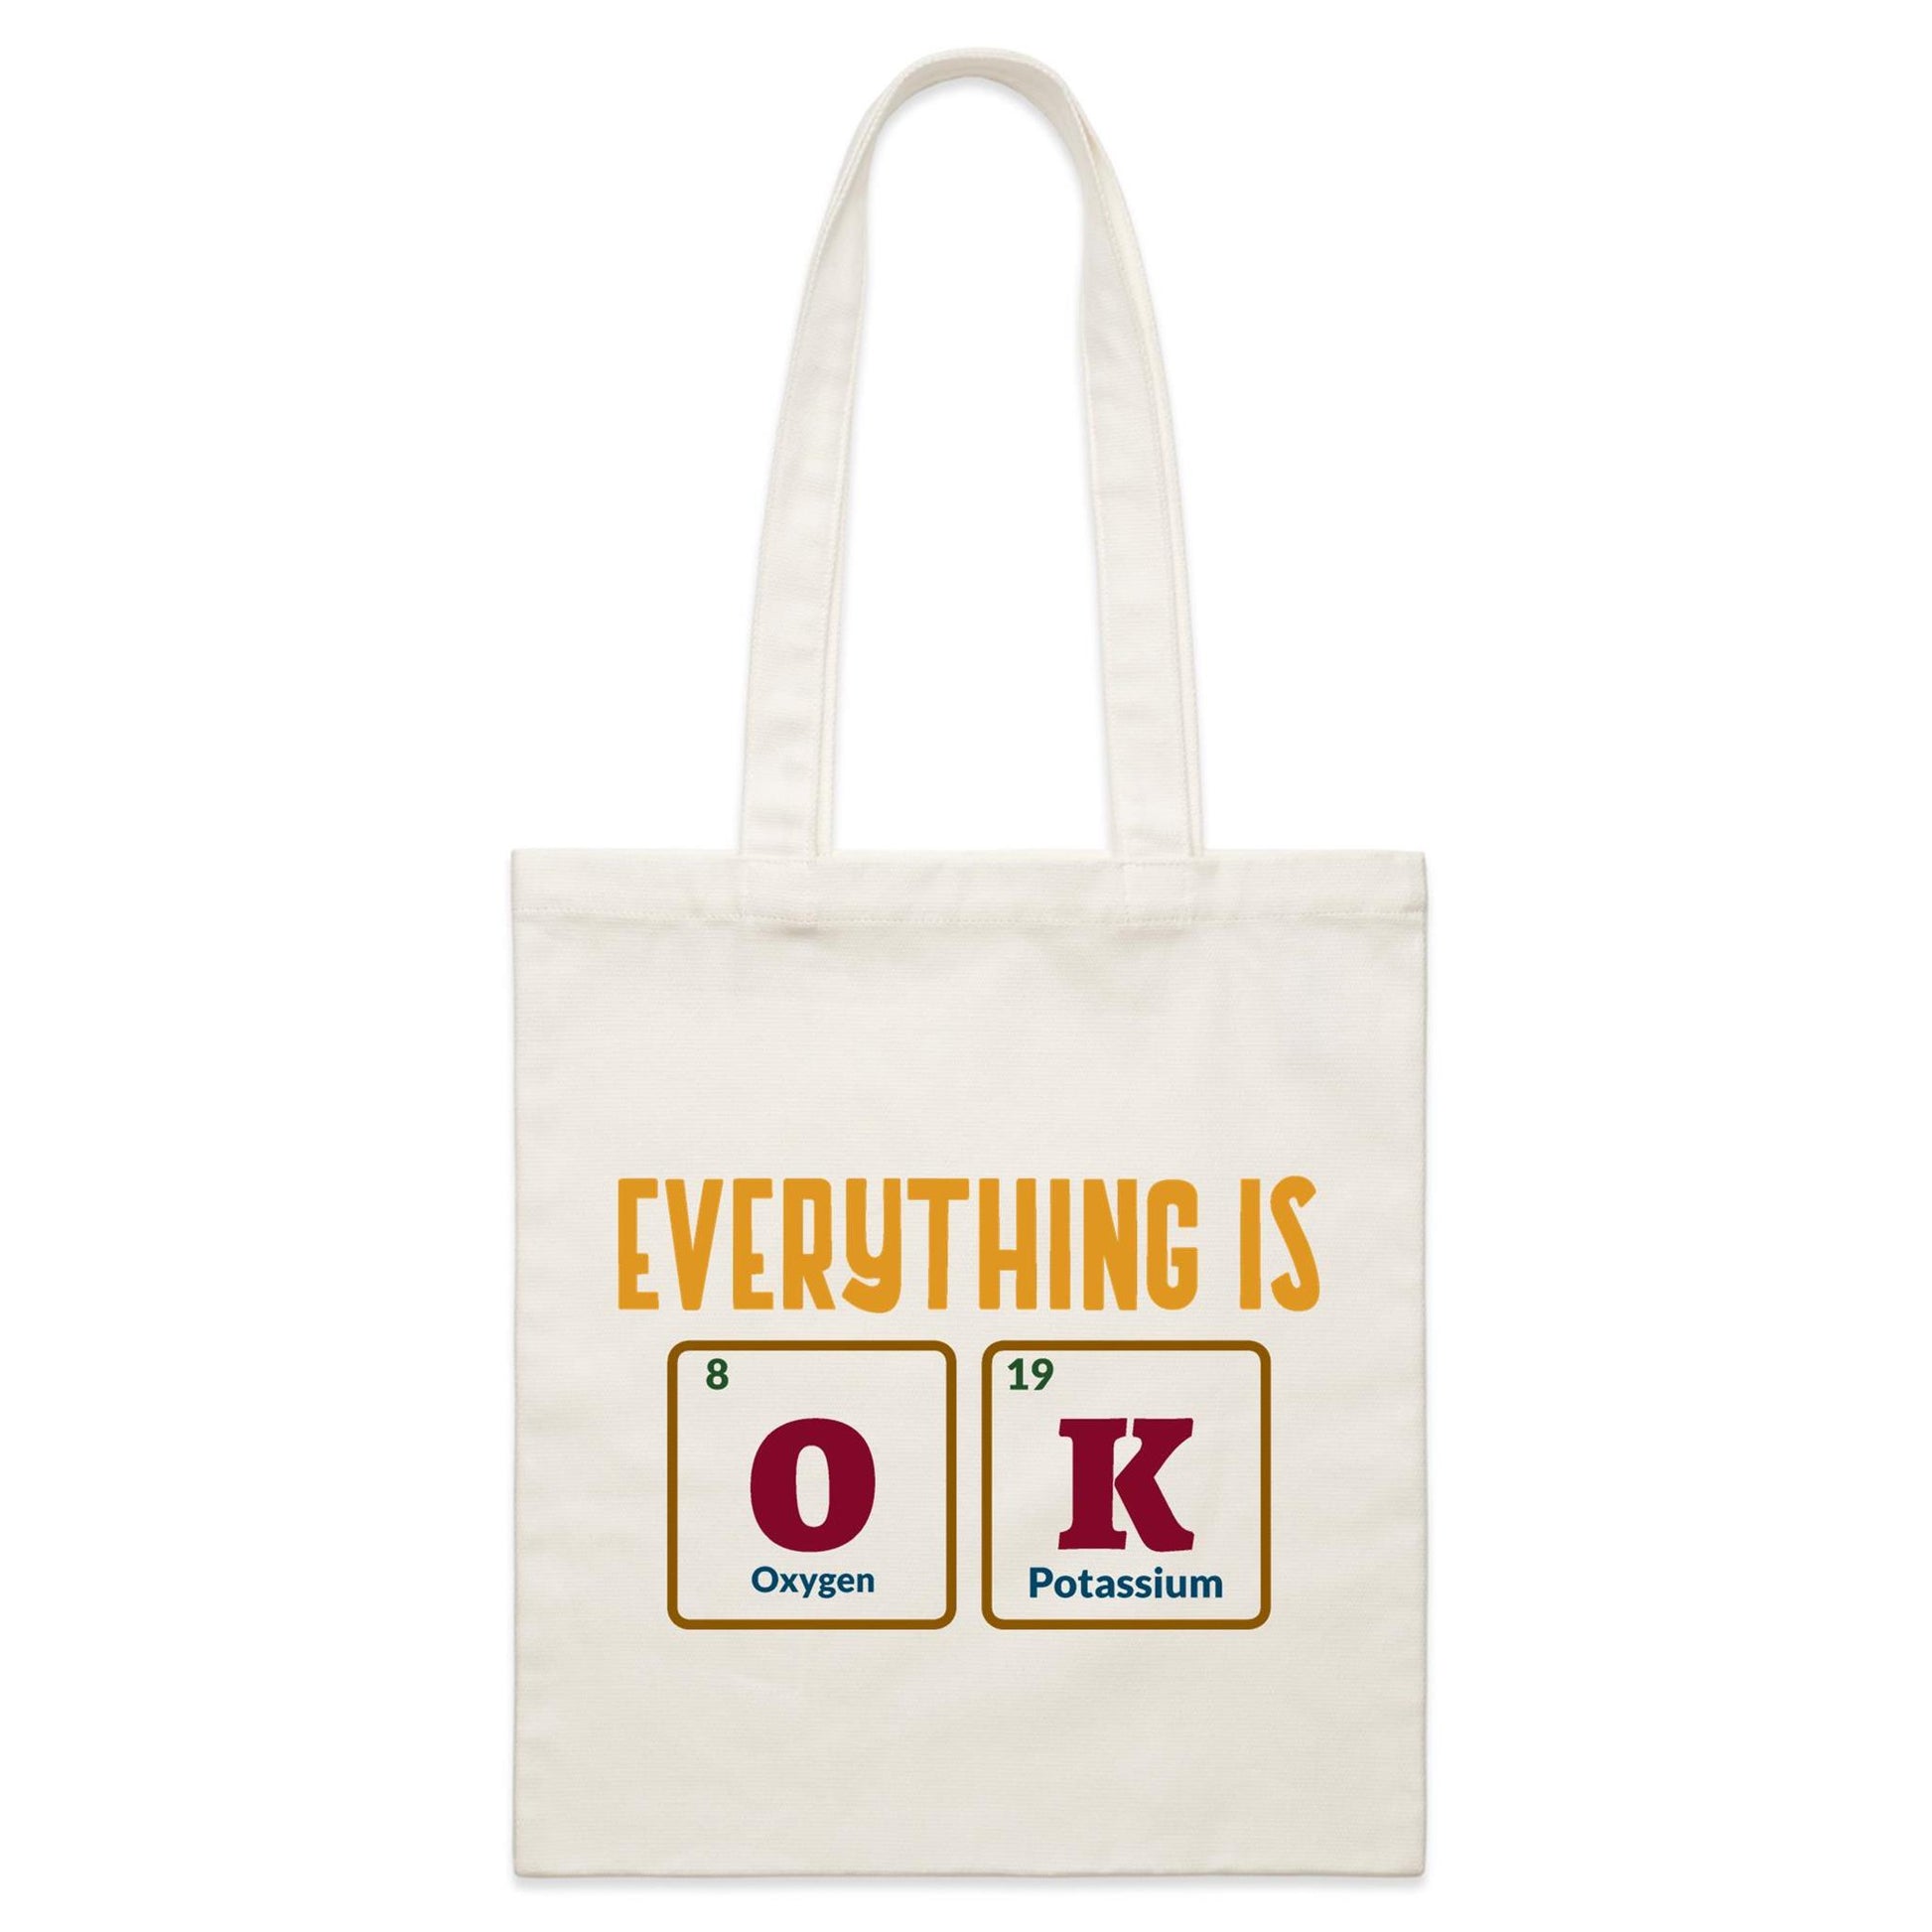 Everything Is OK, Periodic Table Of Elements - Parcel Canvas Tote Bag Default Title Parcel Tote Bag Science